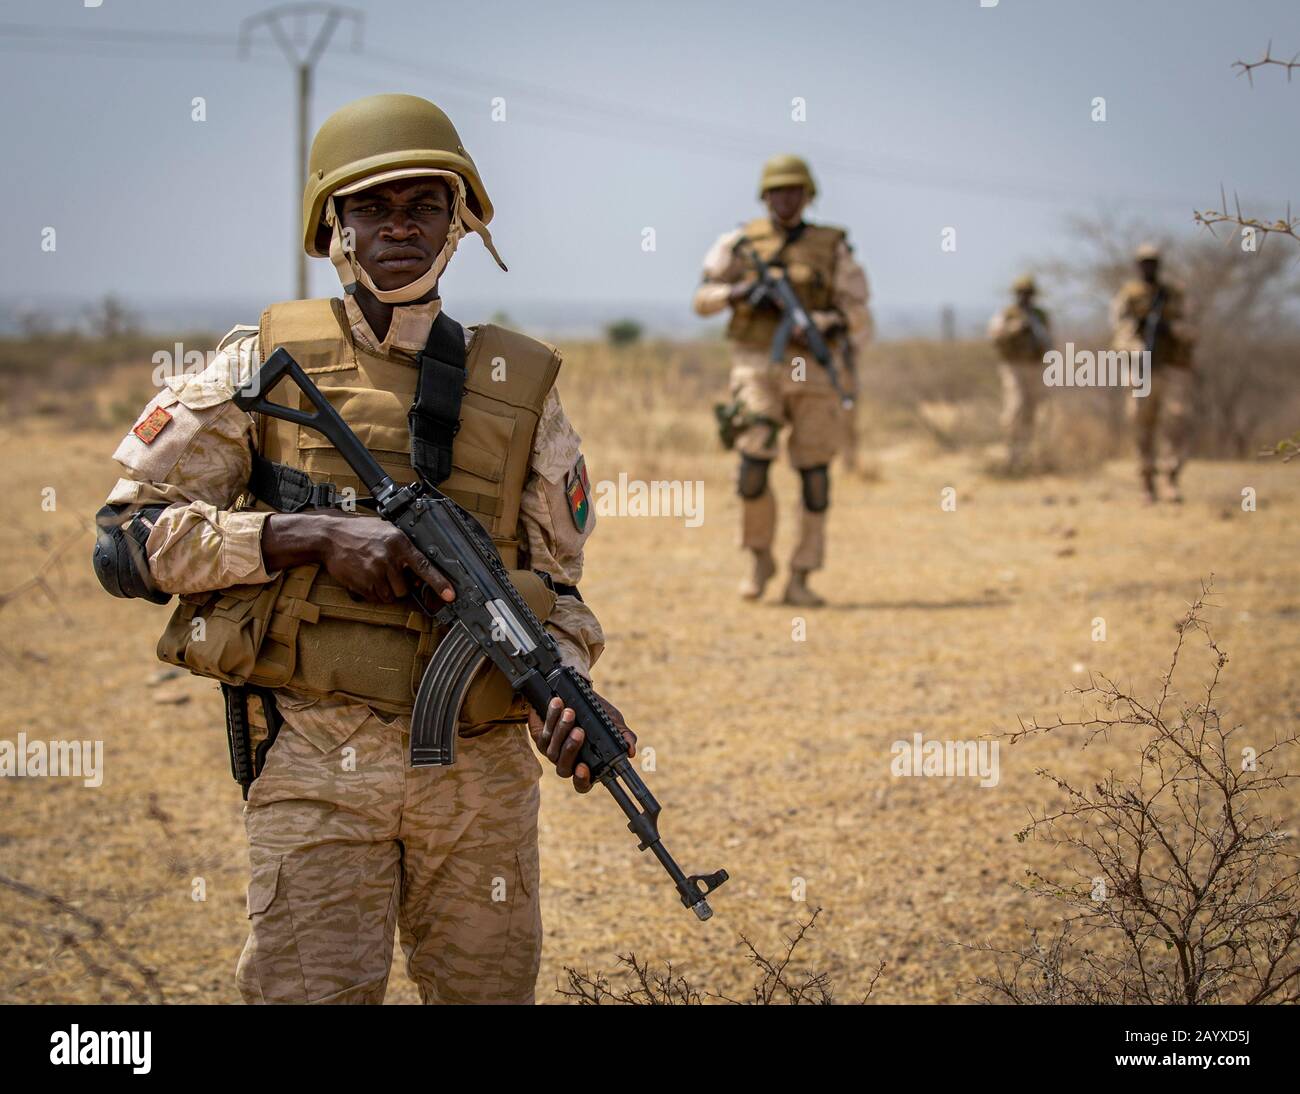 Thies, Senegal. 16th Feb, 2020. A Burkinabe soldier during a training patrol at Flintlock 20 February 16, 2020 near Thies, Senegal. Flintlock is the largest annual Special Operations Forces exercise in Africa involving U.S and Allied troops and African partner nations. Credit: Miguel Pena/Planetpix/Alamy Live News Credit: Planetpix/Alamy Live News Stock Photo